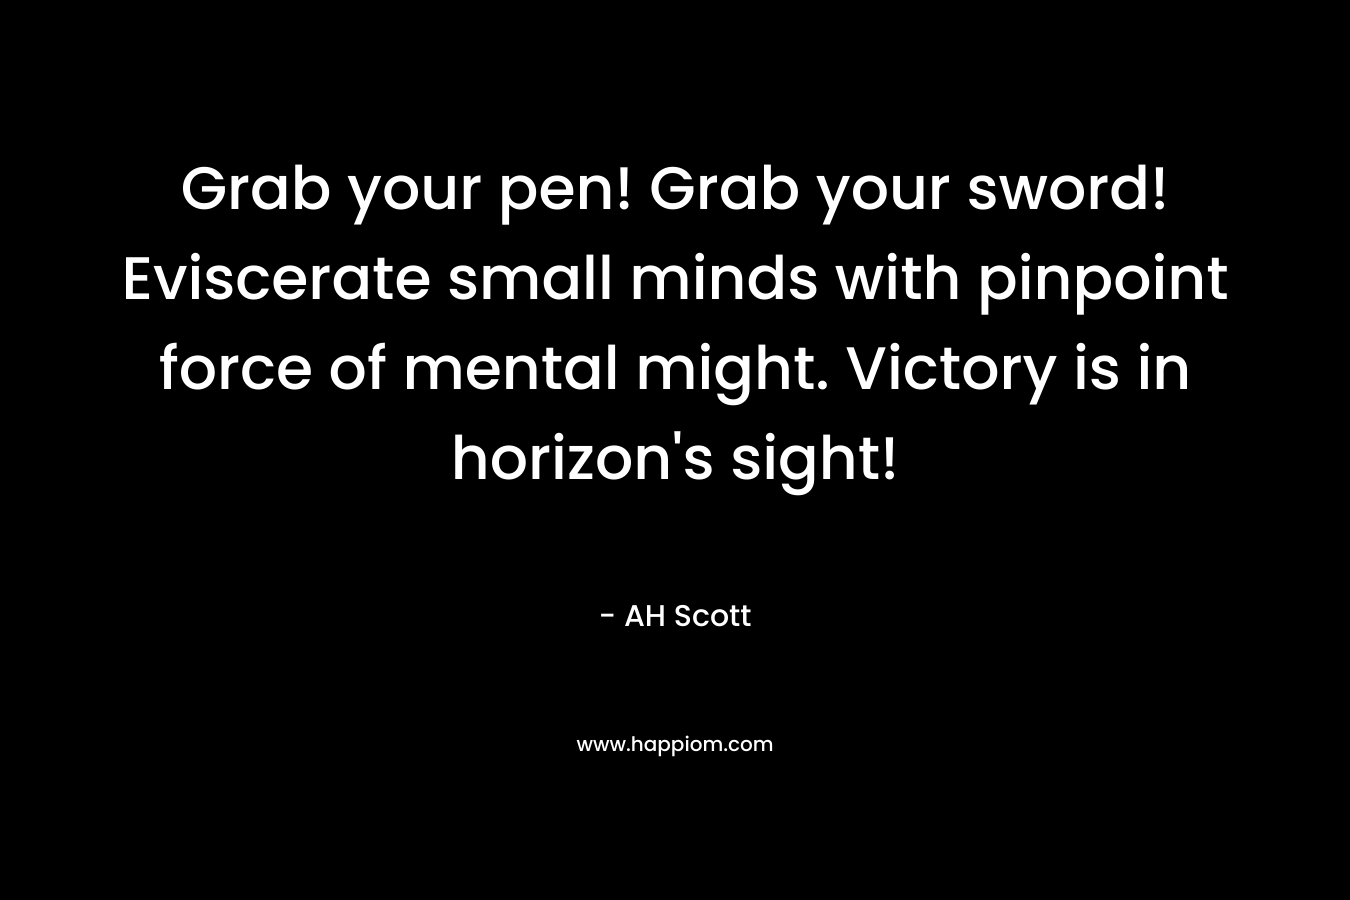 Grab your pen! Grab your sword! Eviscerate small minds with pinpoint force of mental might. Victory is in horizon’s sight! – AH Scott